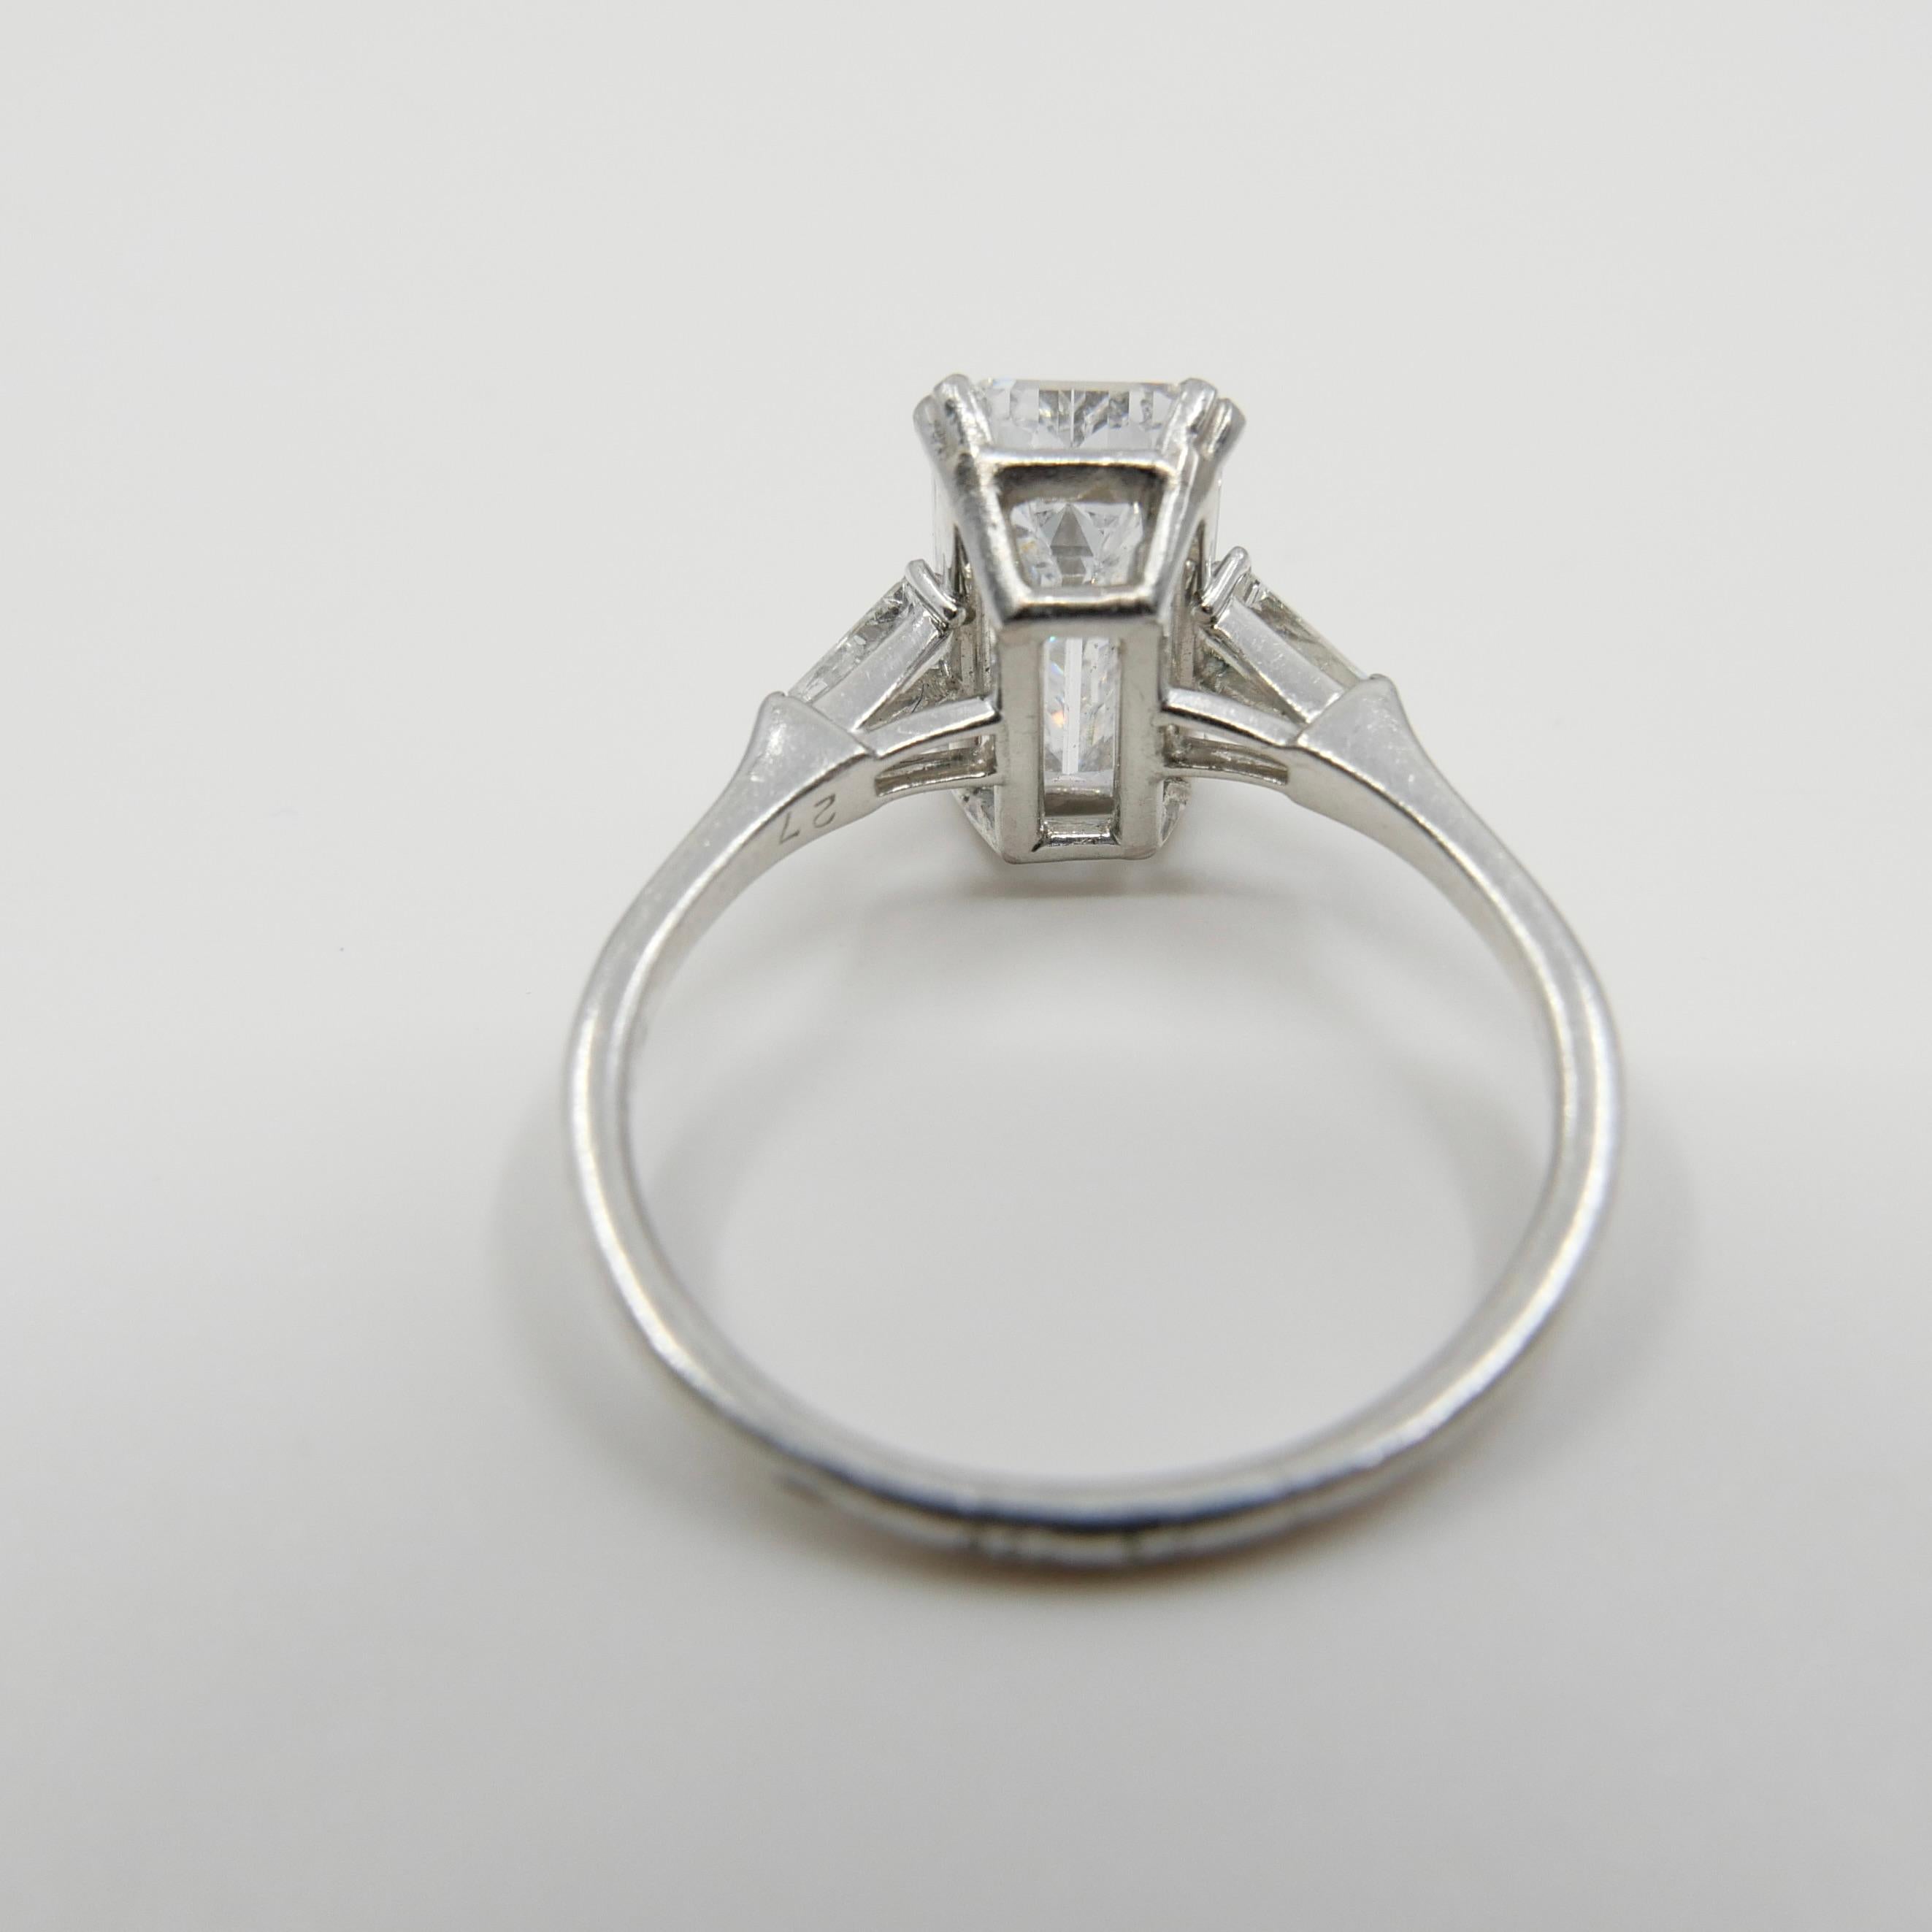 GIA Certified 3 Cts D IF Winston Vintage Diamond Ring, Elongated with 1.78 Ratio 5